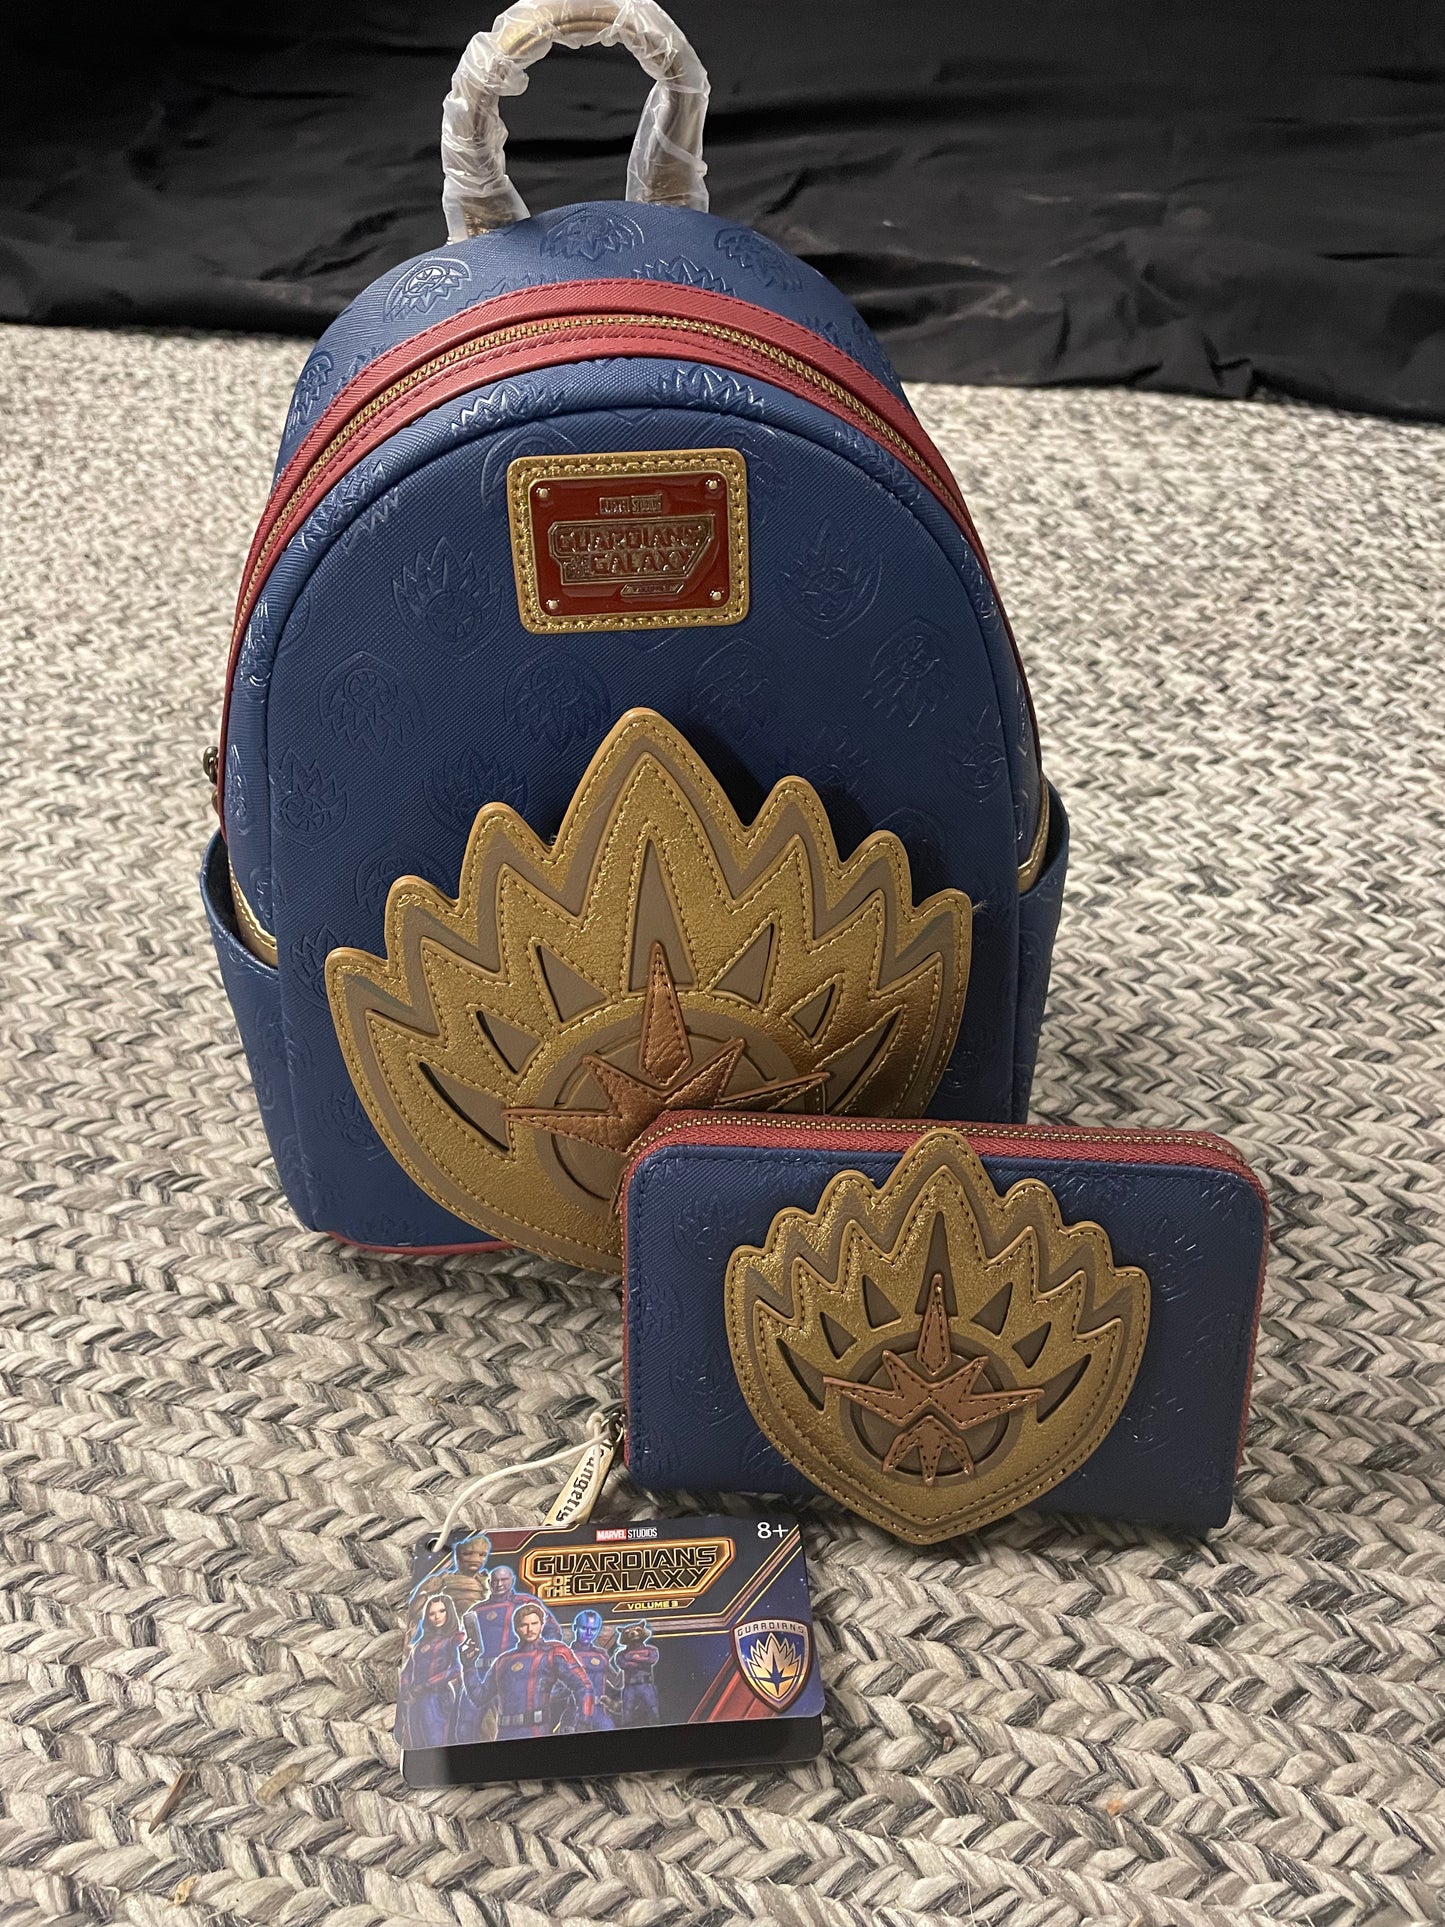 Guardians of the Galaxy Mini Backpack and Wallet